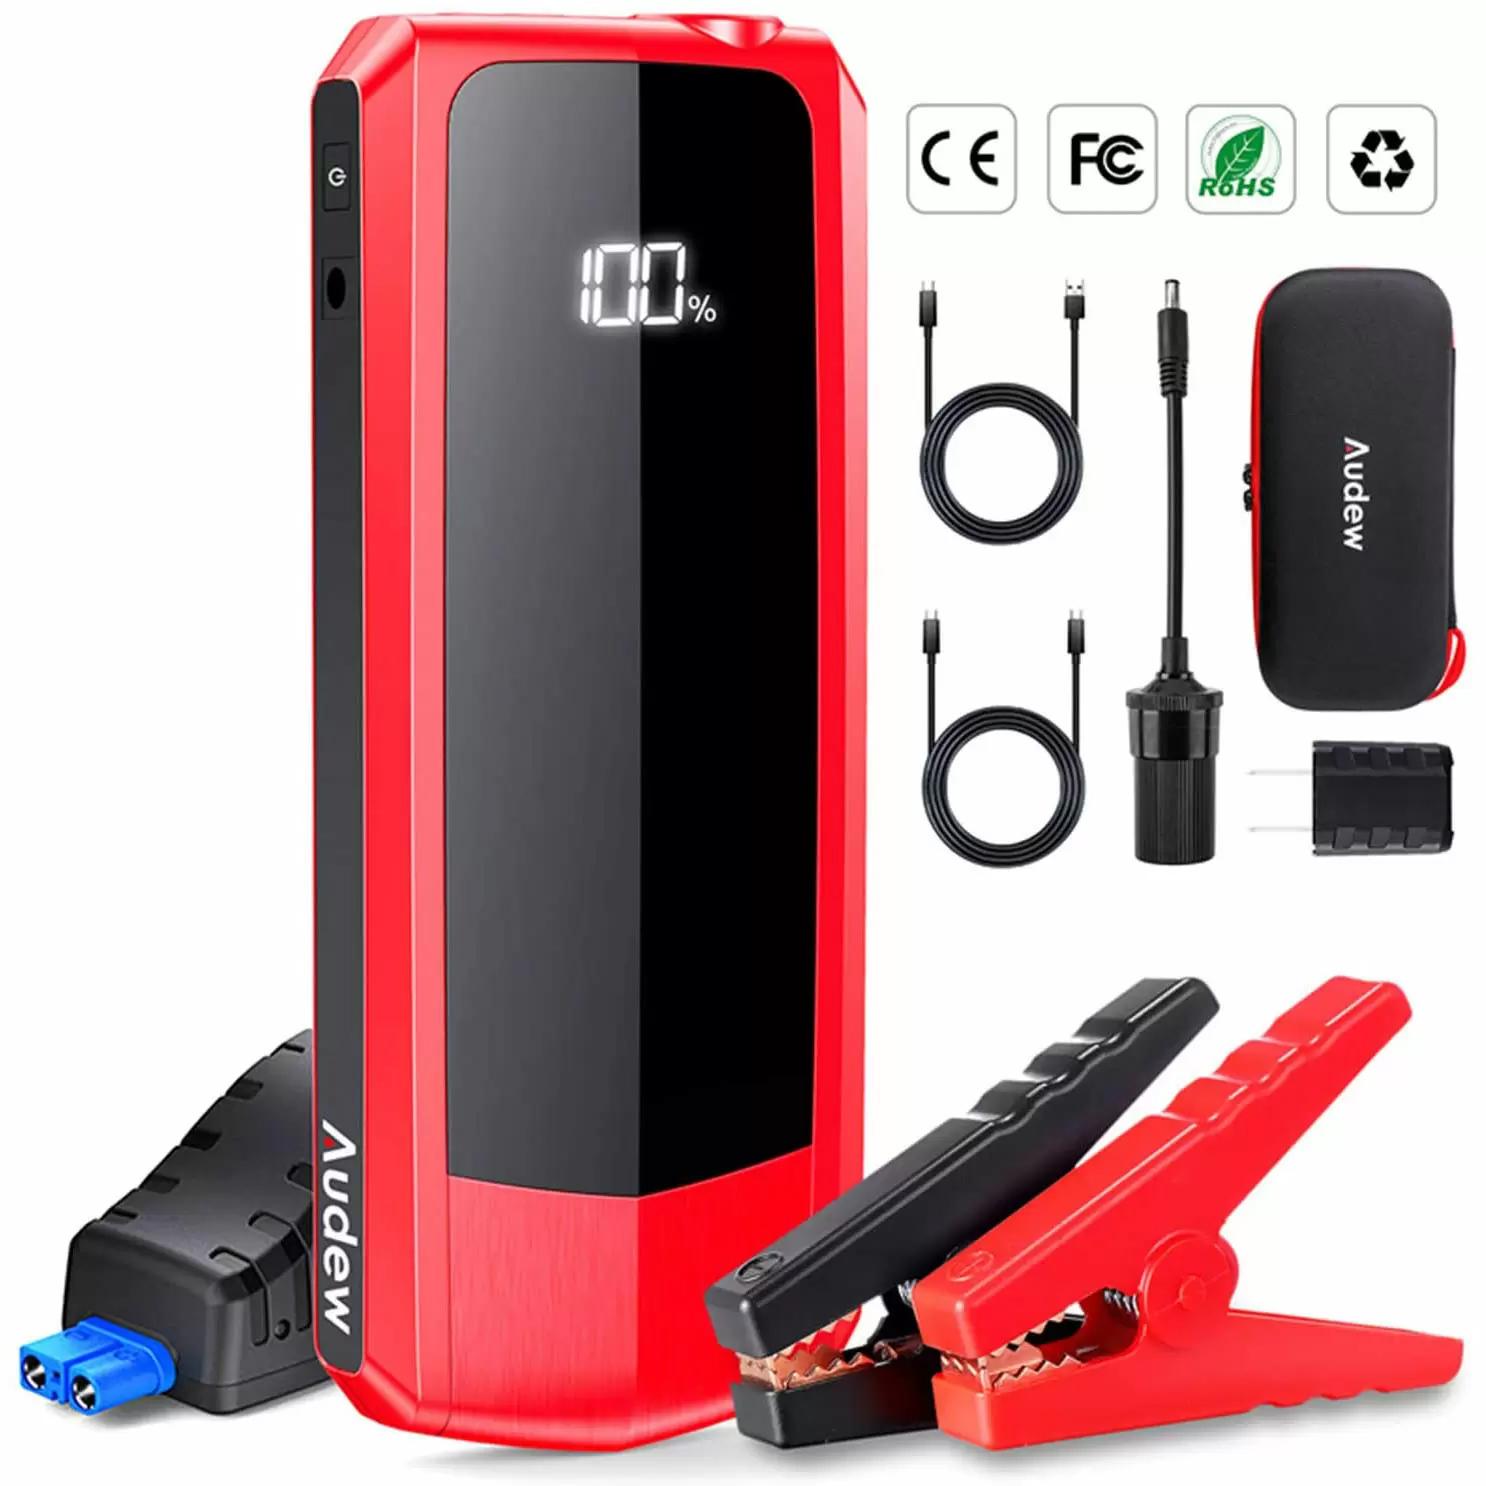 Audew 20000mAh Car Jump Starter with Dual QC USB Ports for $70.55 Shipped